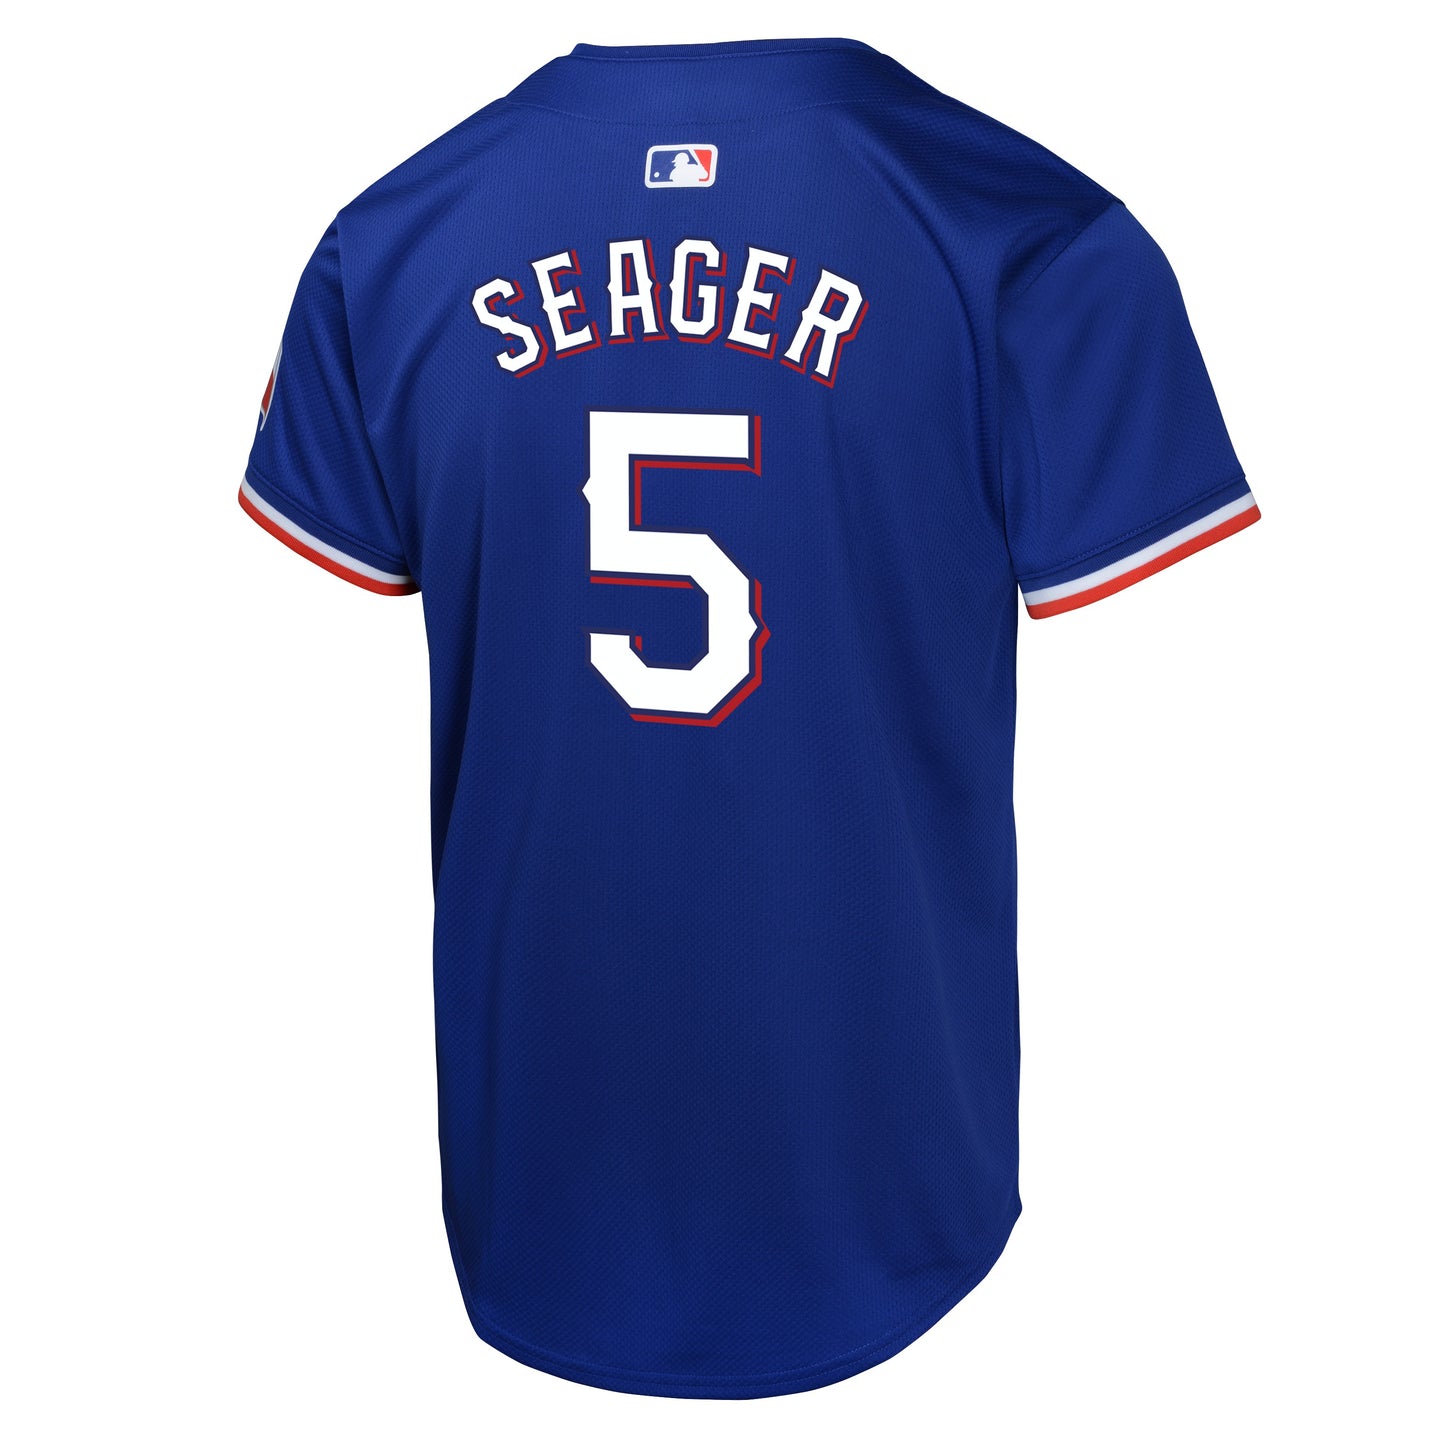 Youth Corey Seager Texas Rangers NIKE Royal Blue Alternate Limited Replica Jersey (Copy)